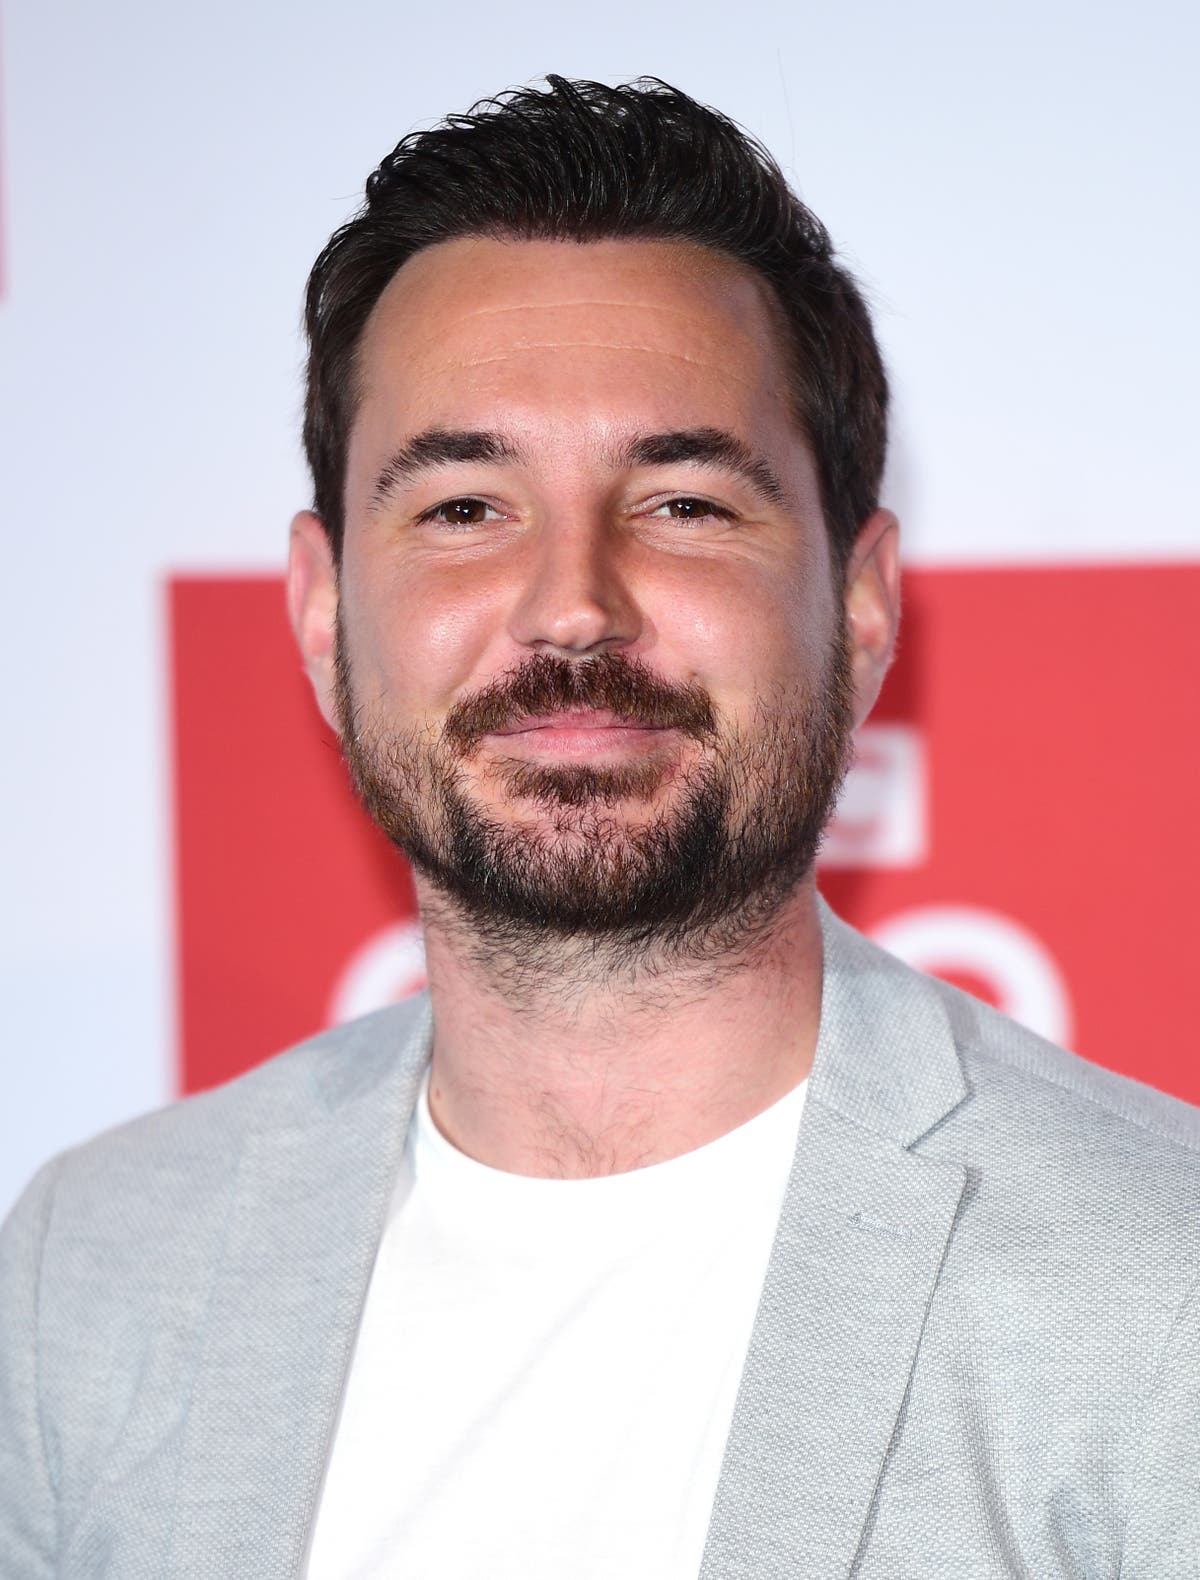 Martin Compston launches Restless Natives podcast with ex-newspaper editor